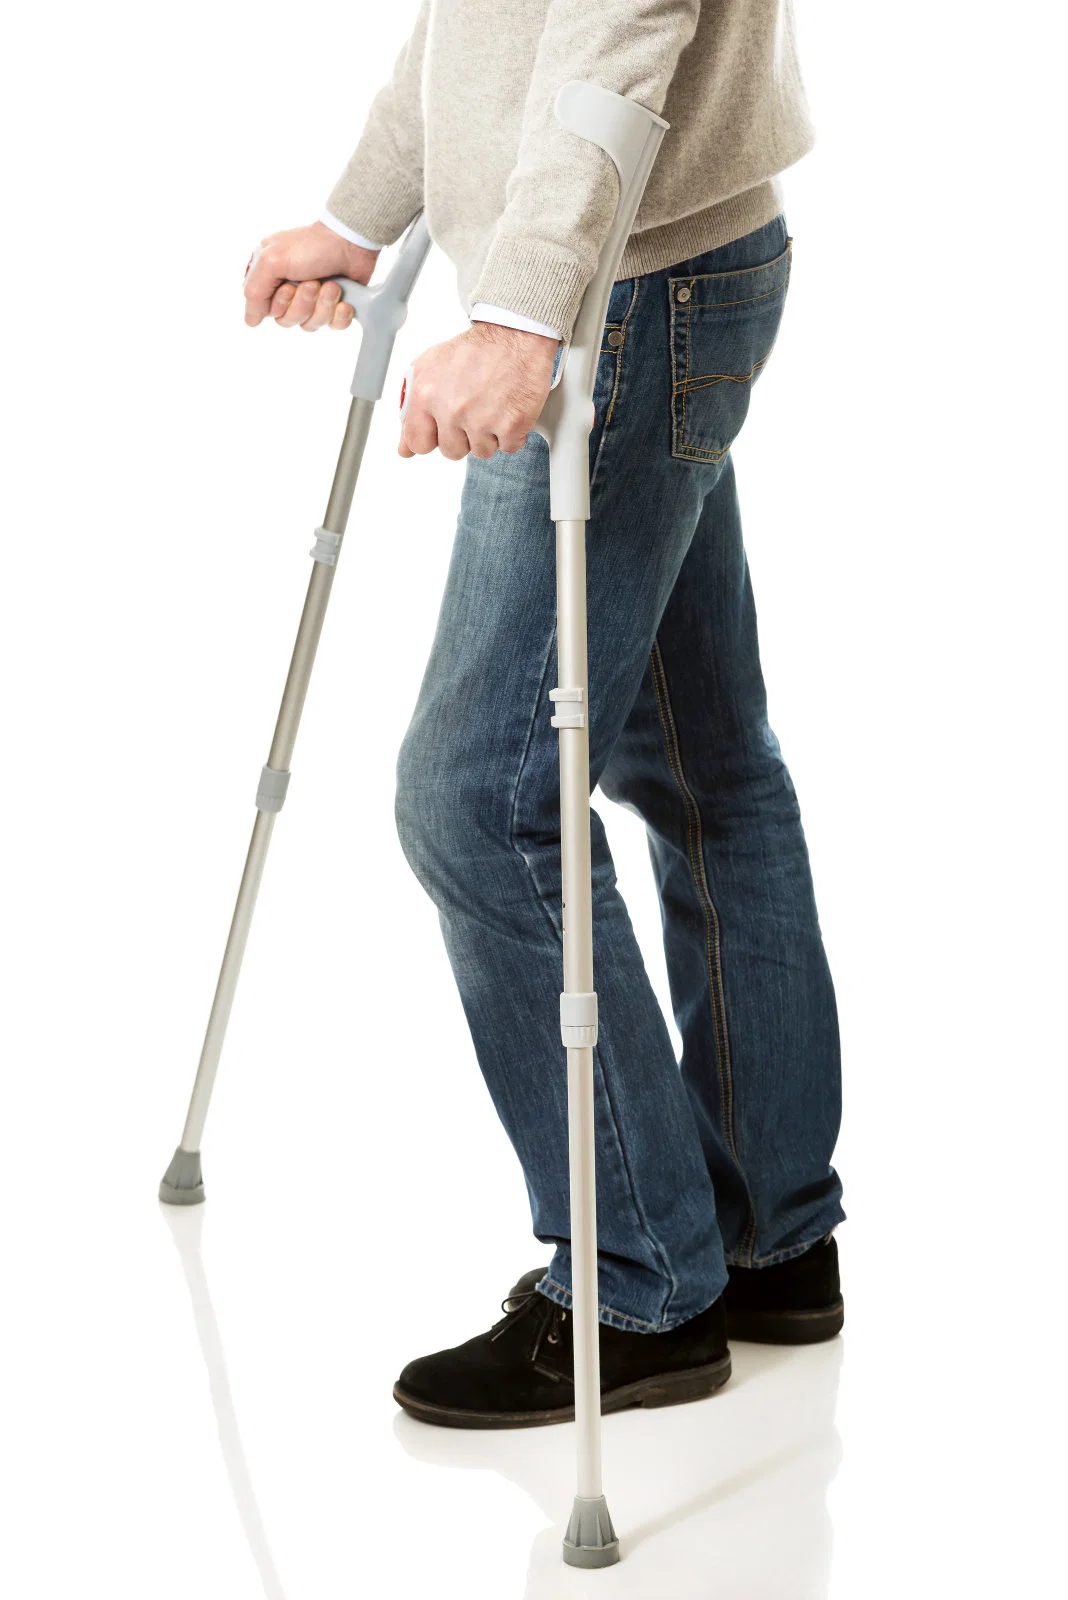 Tall Adult, Youth, Child Crutch Brother Medical Walking Aid Elbow Crutches